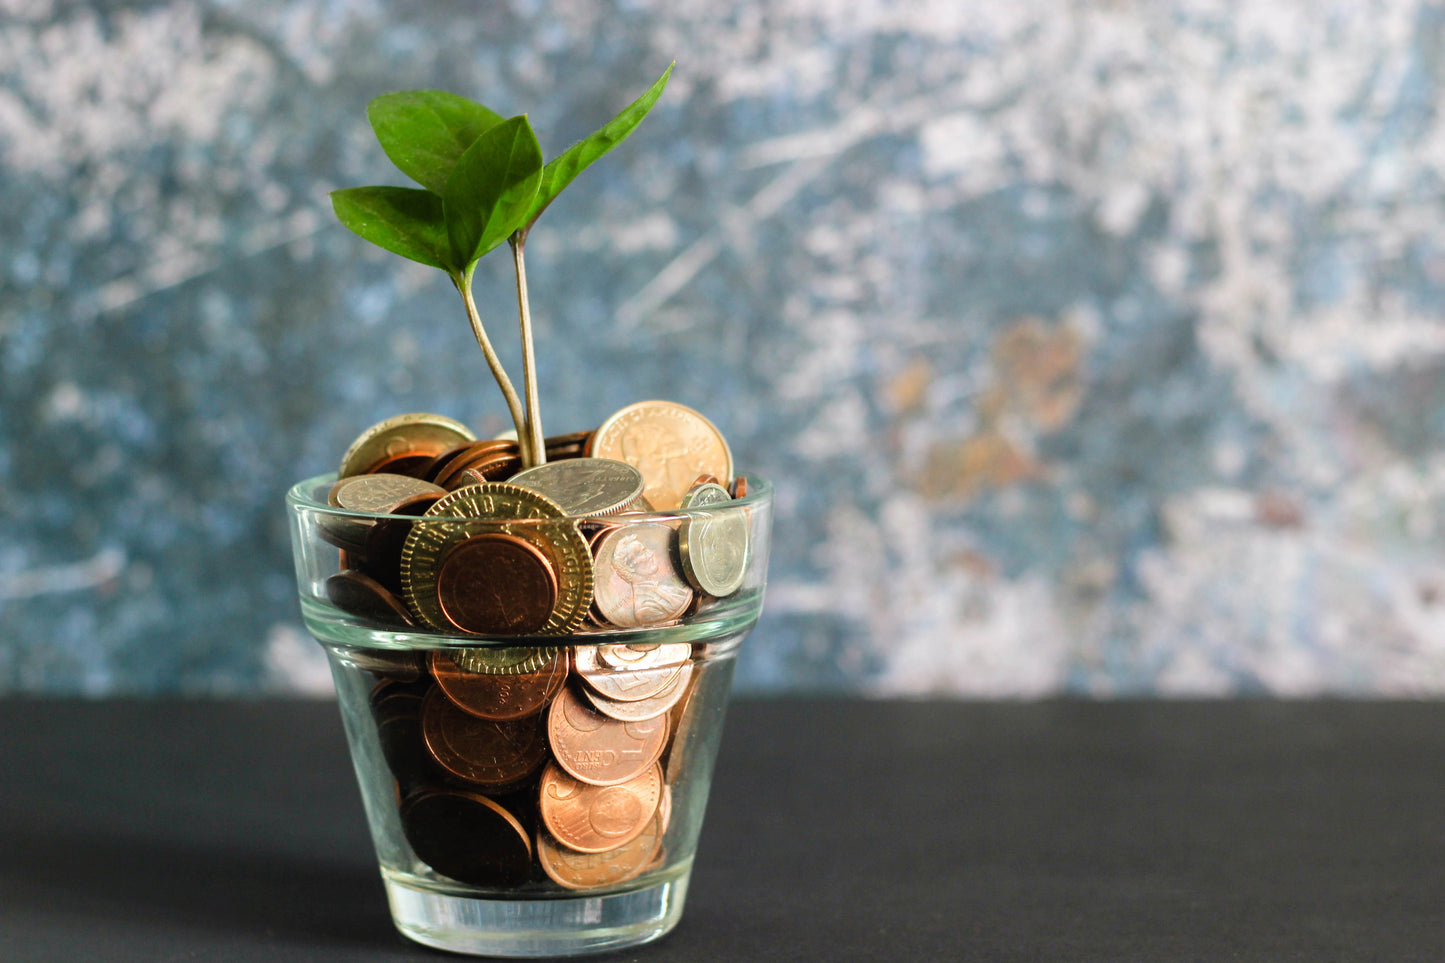 A tiny plant begins to grow out of a small glass full of coins.